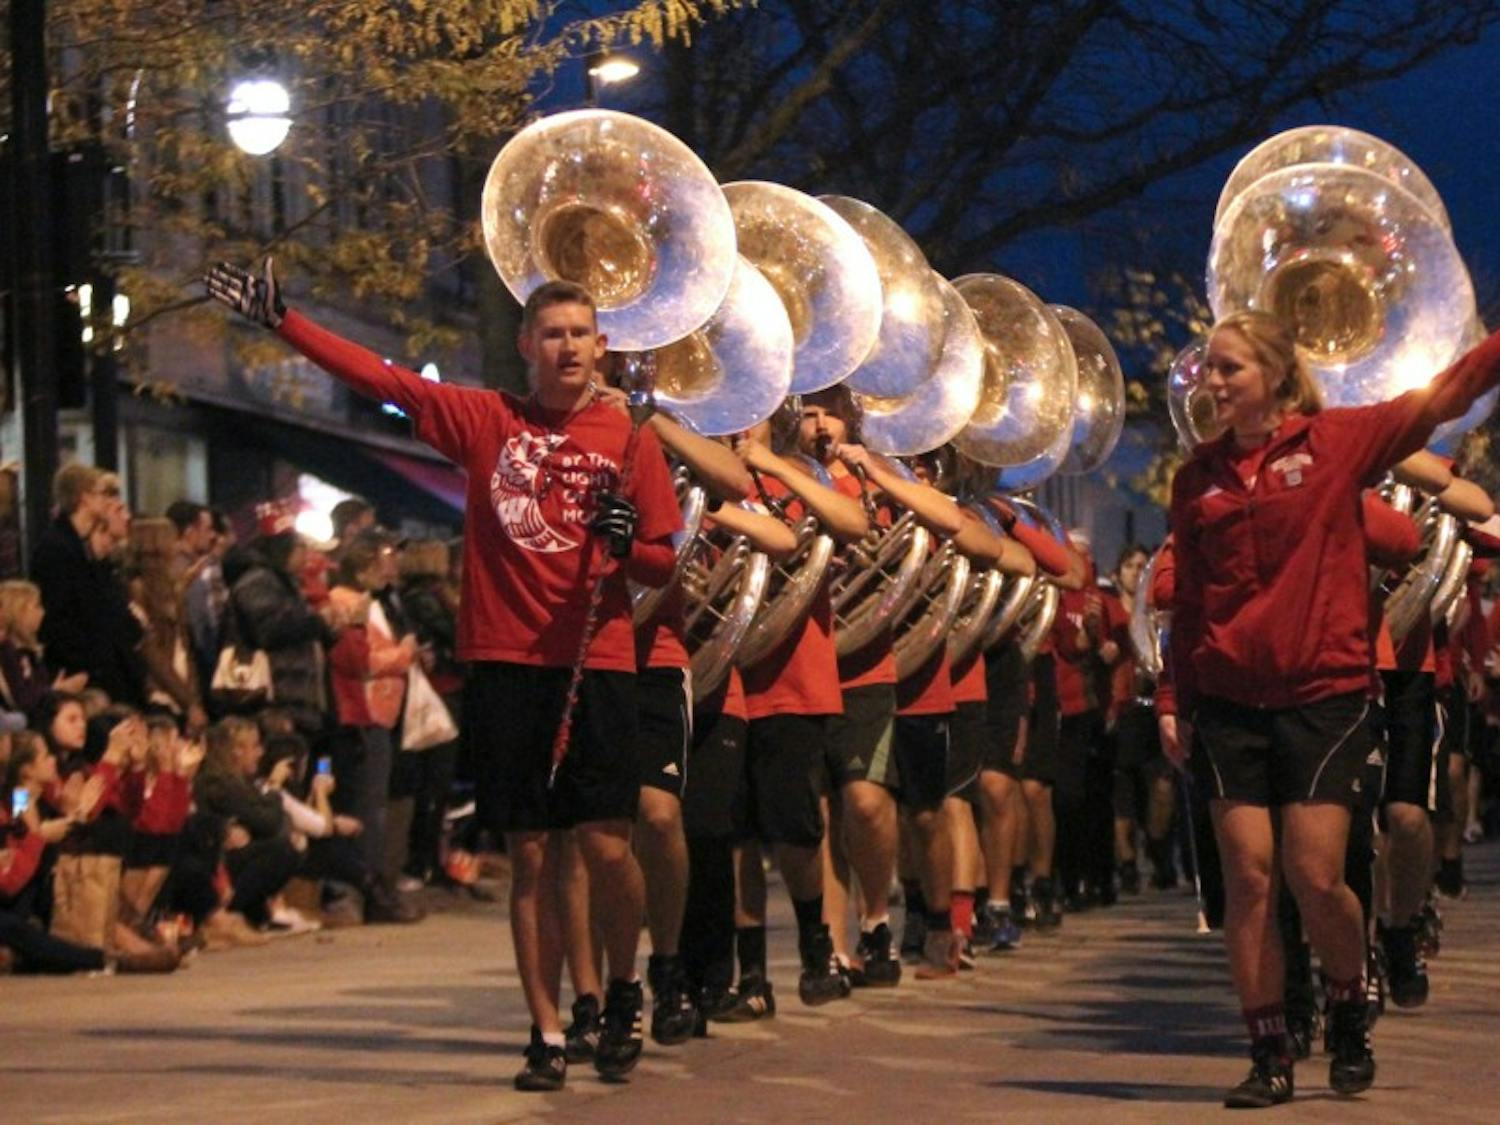 Several streets in the State Street area will close for UW-Madison's Homecoming Parade Friday at 6 p.m.